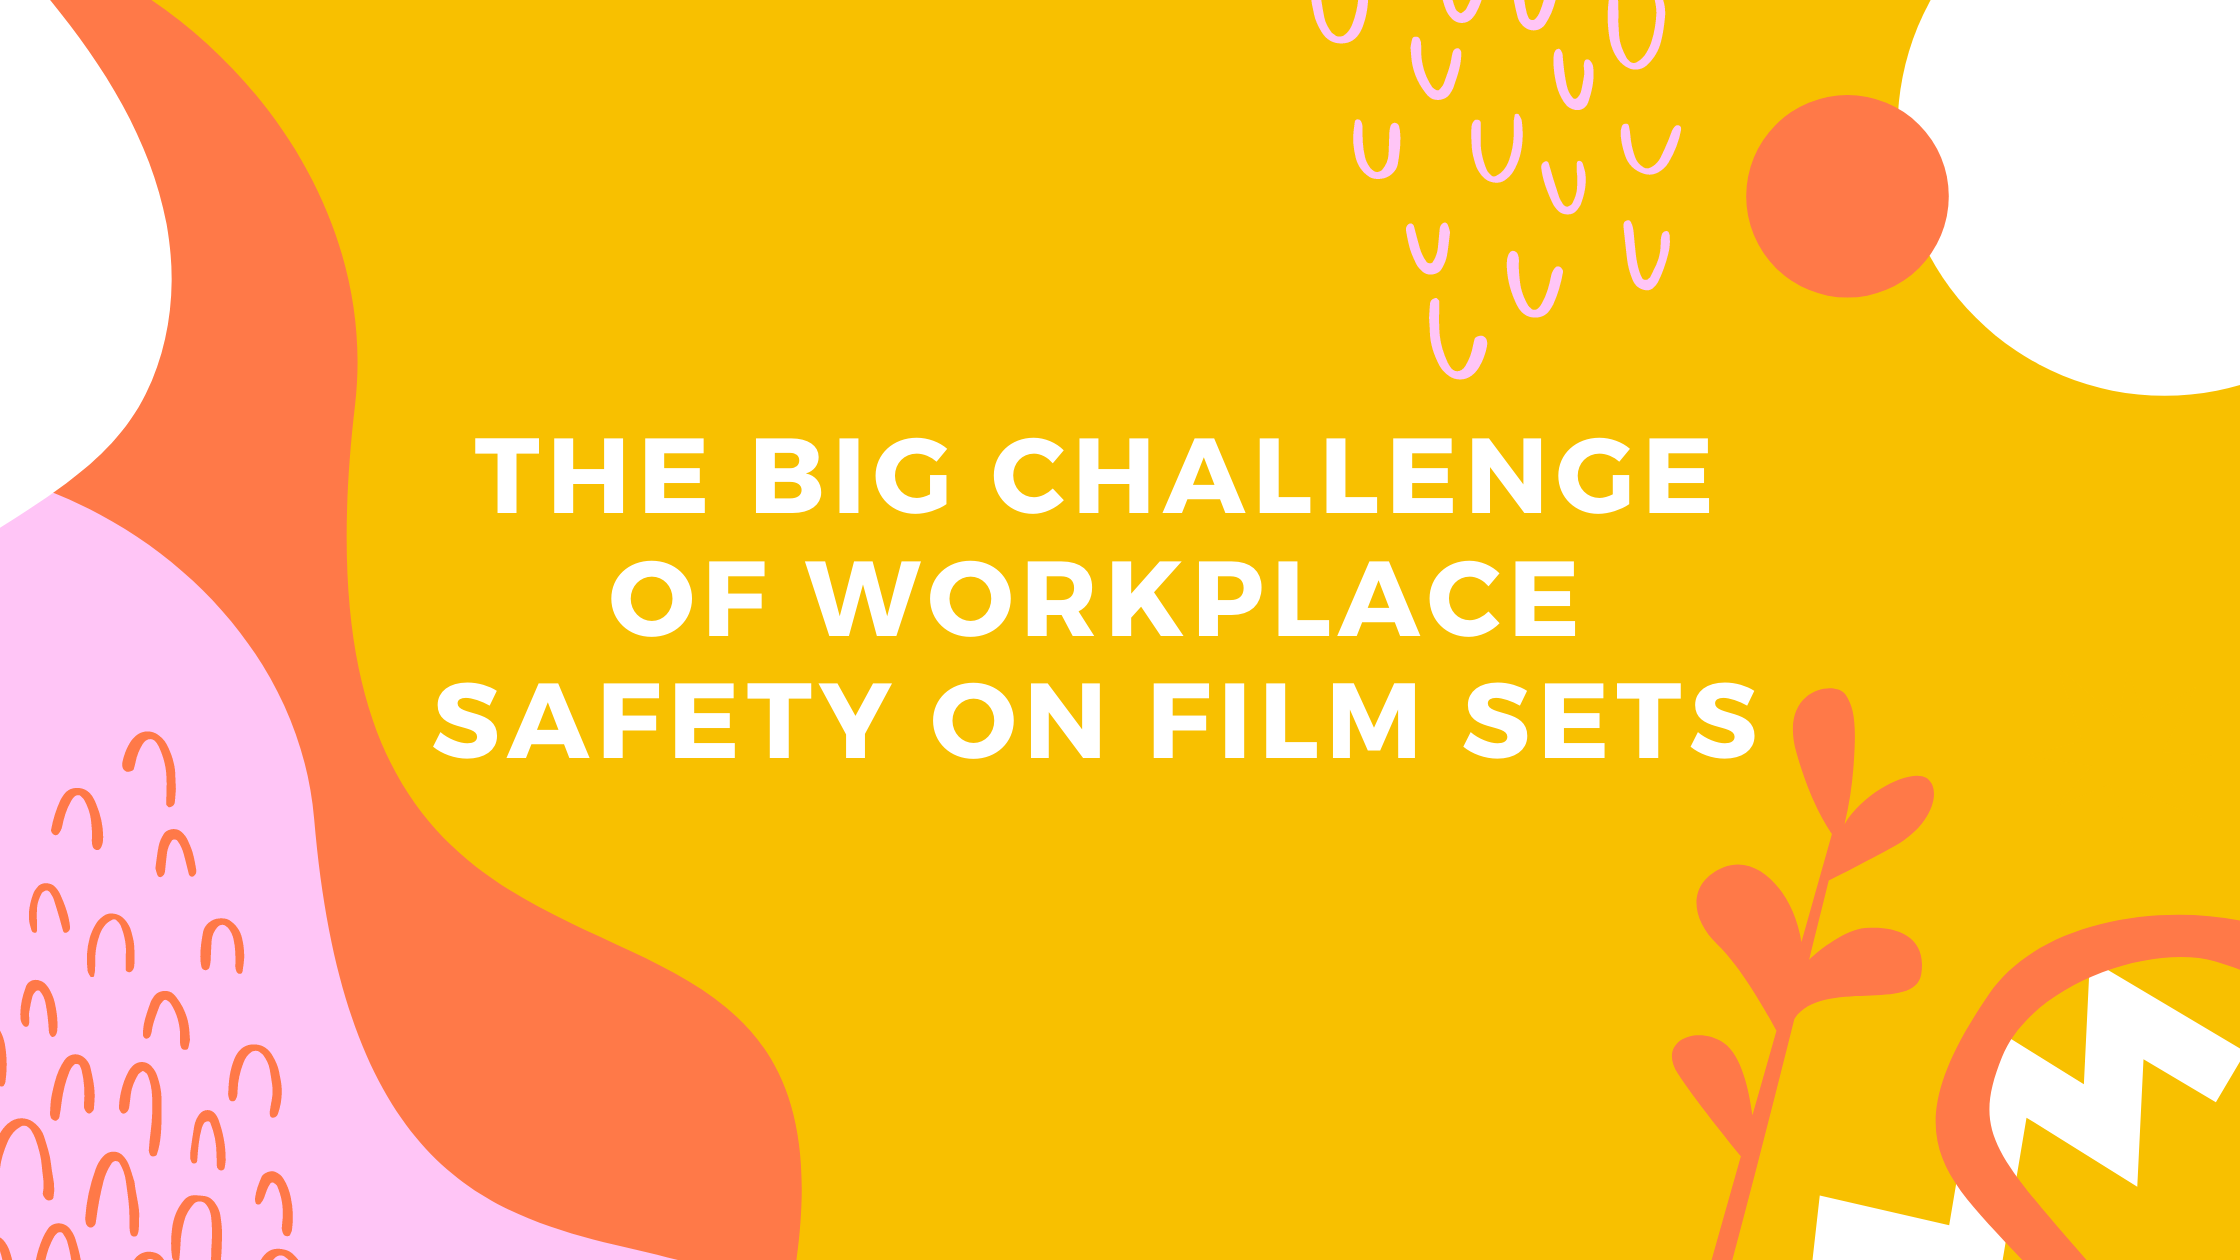 The Big Challenge of workplace Safety on Film Sets